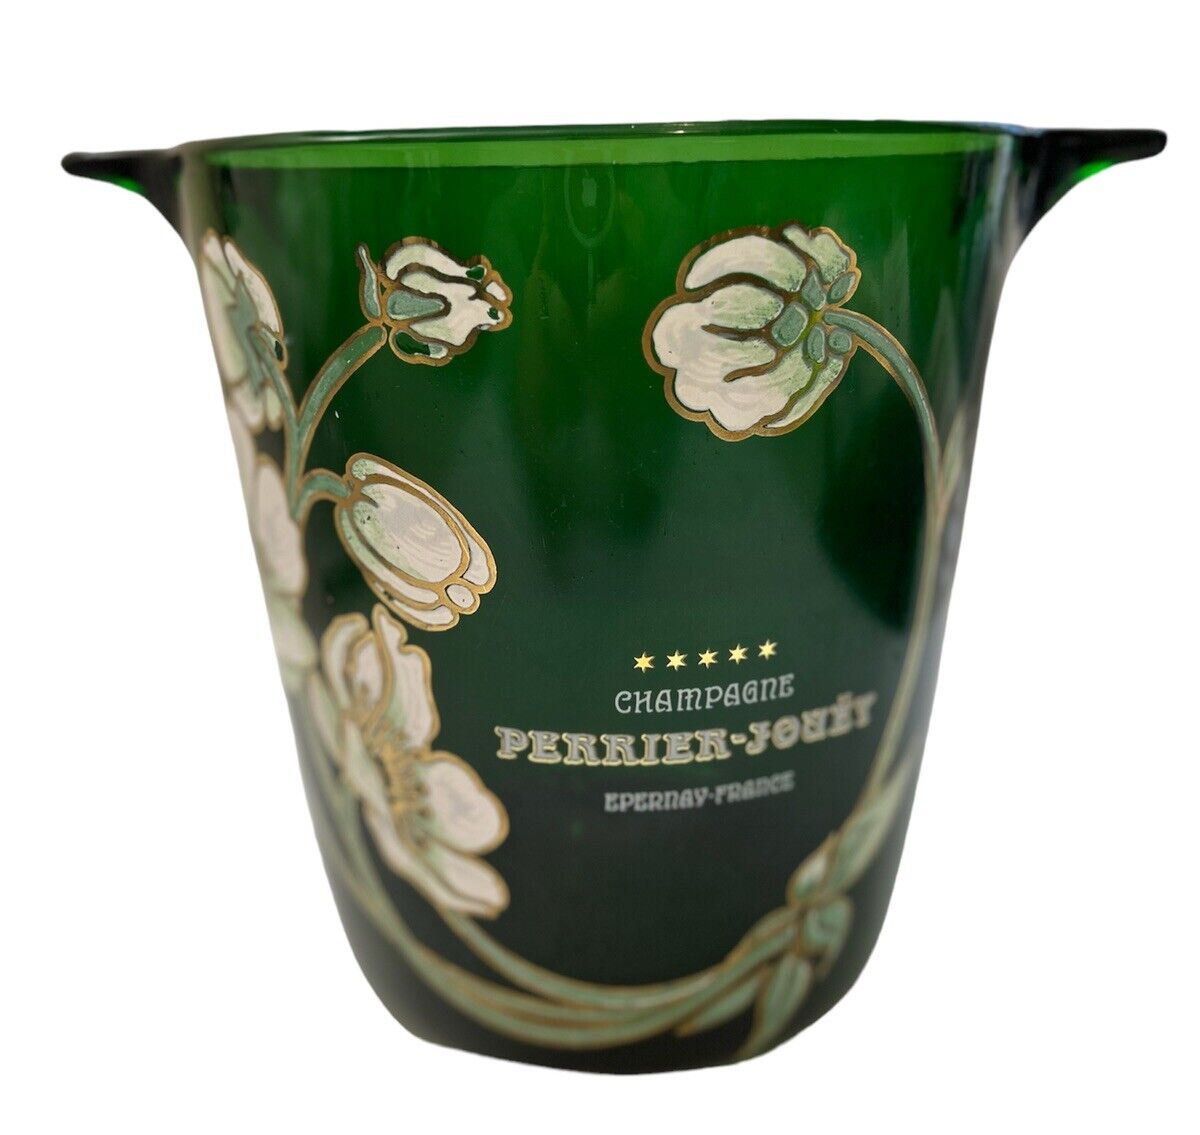 Vintage French Perrier-Jouet France Champagne green Glass Ice Bucket